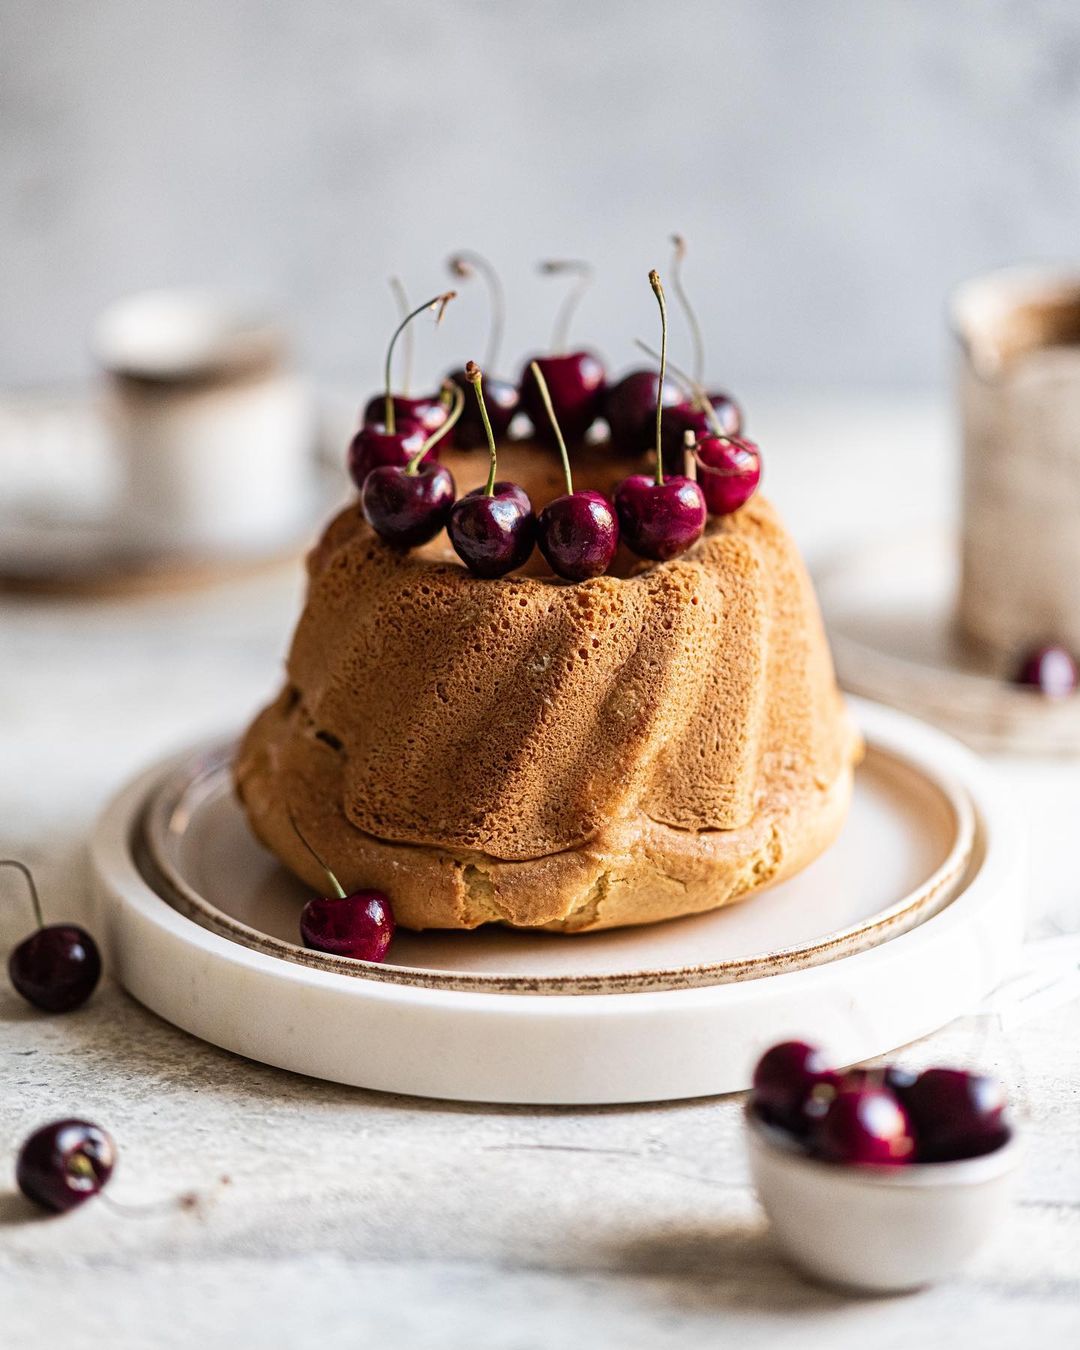 Mouthwatering bundt cake with grapes